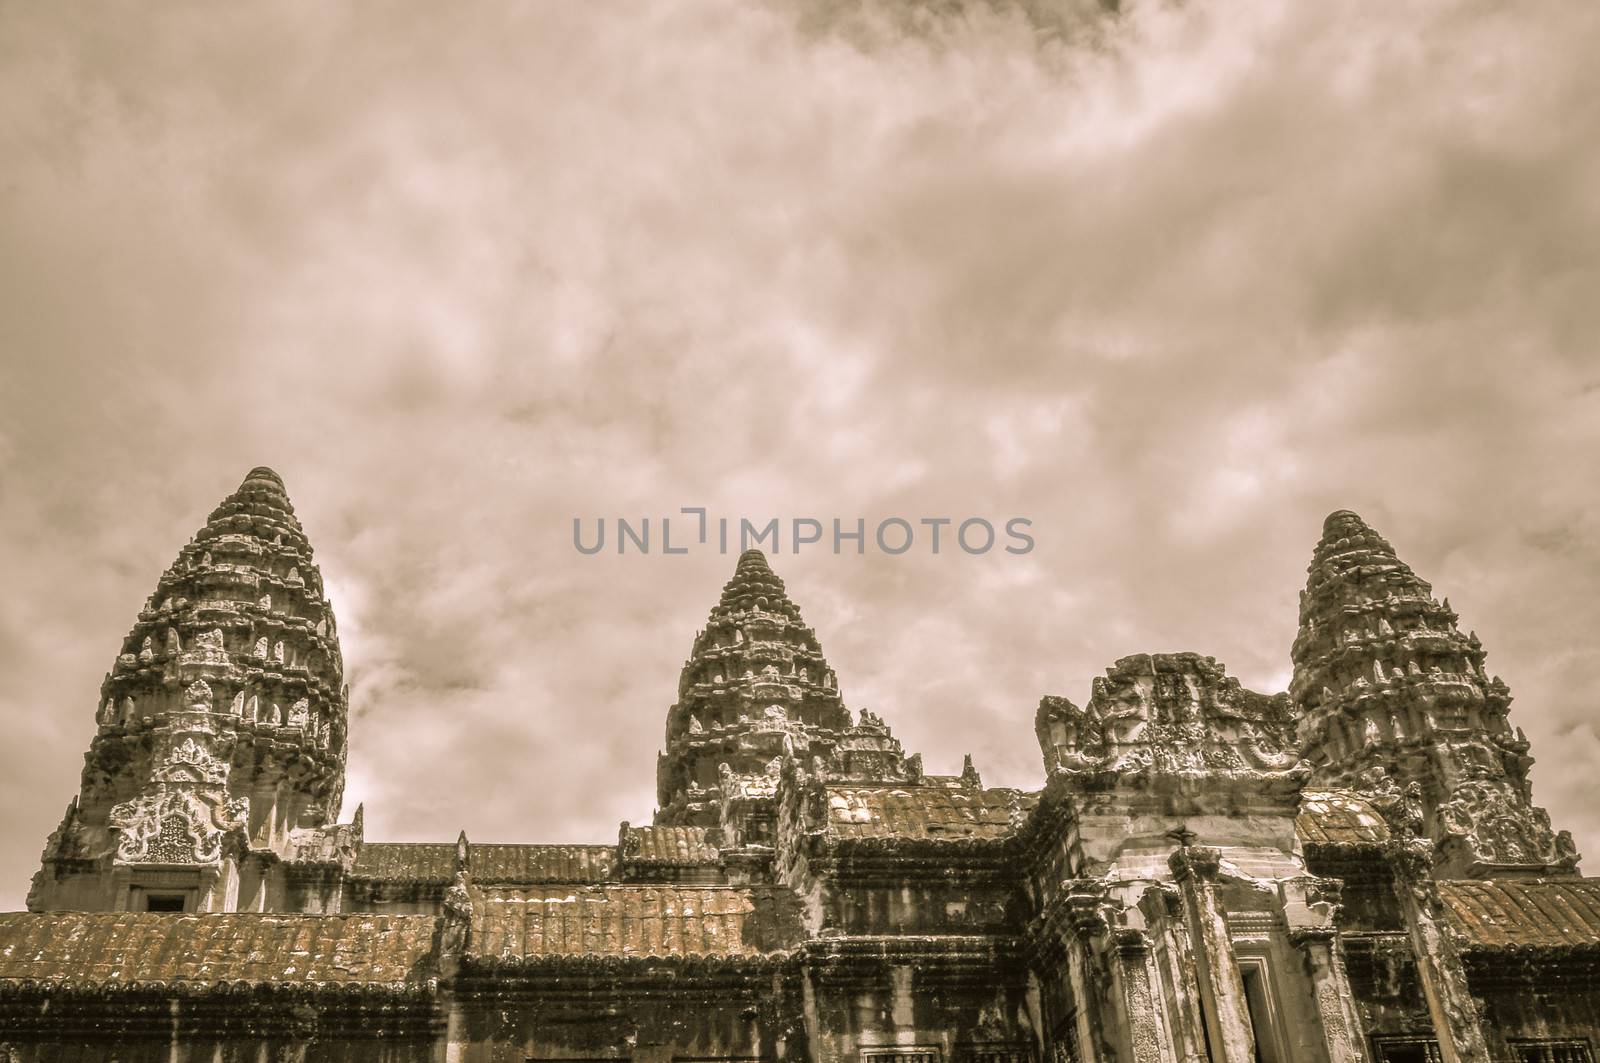 Bayon Temple and Angkor Wat Khmer complex in Siem Reap, Cambodia by weltreisendertj